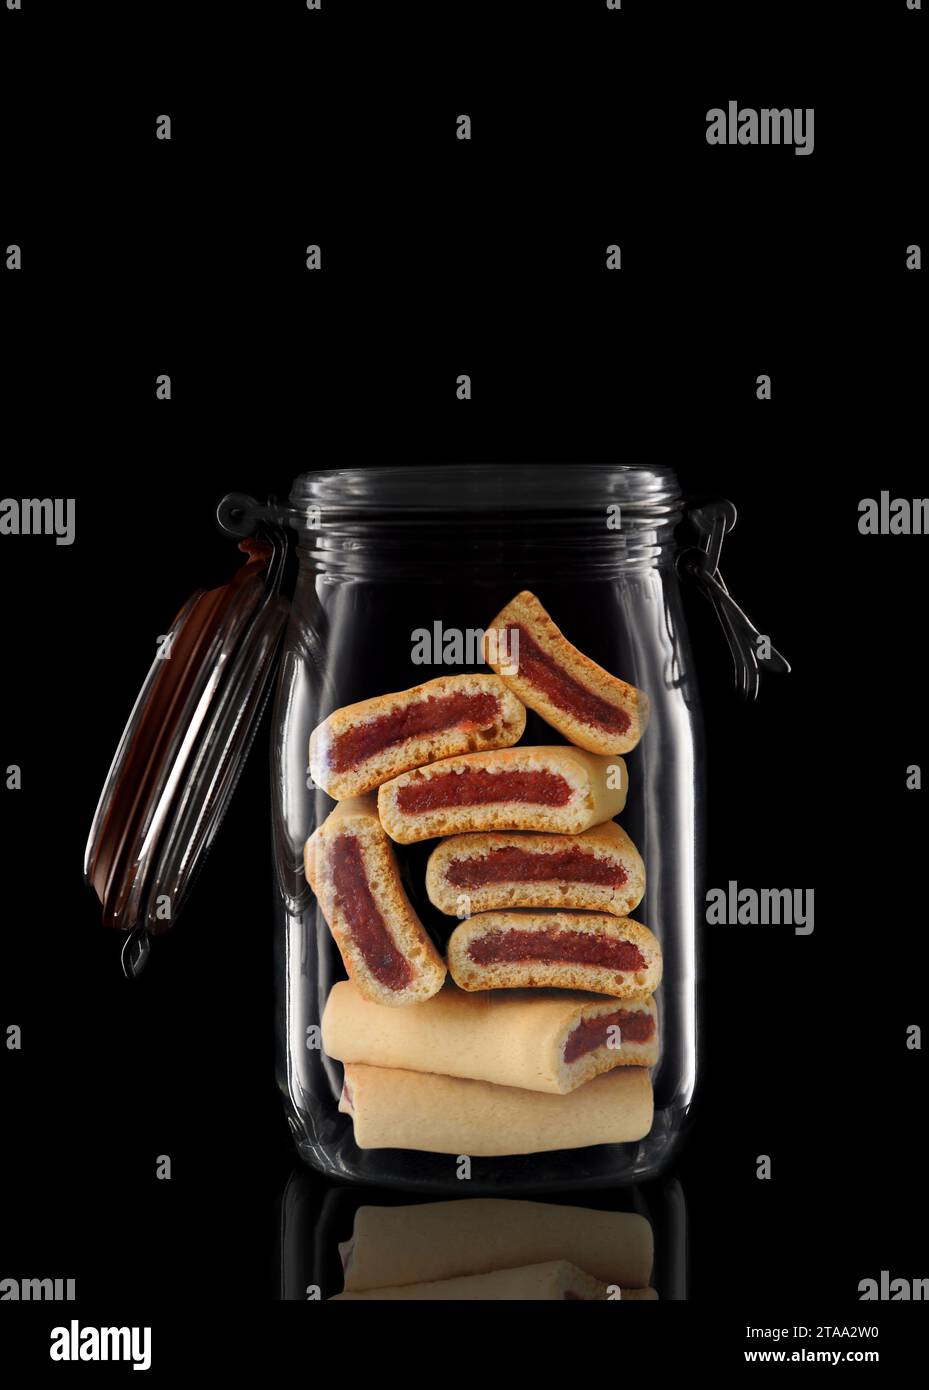 Fruit Newton cookies in a glass storage or canning jar isolated on black with reflection, with lid open. Stock Photo